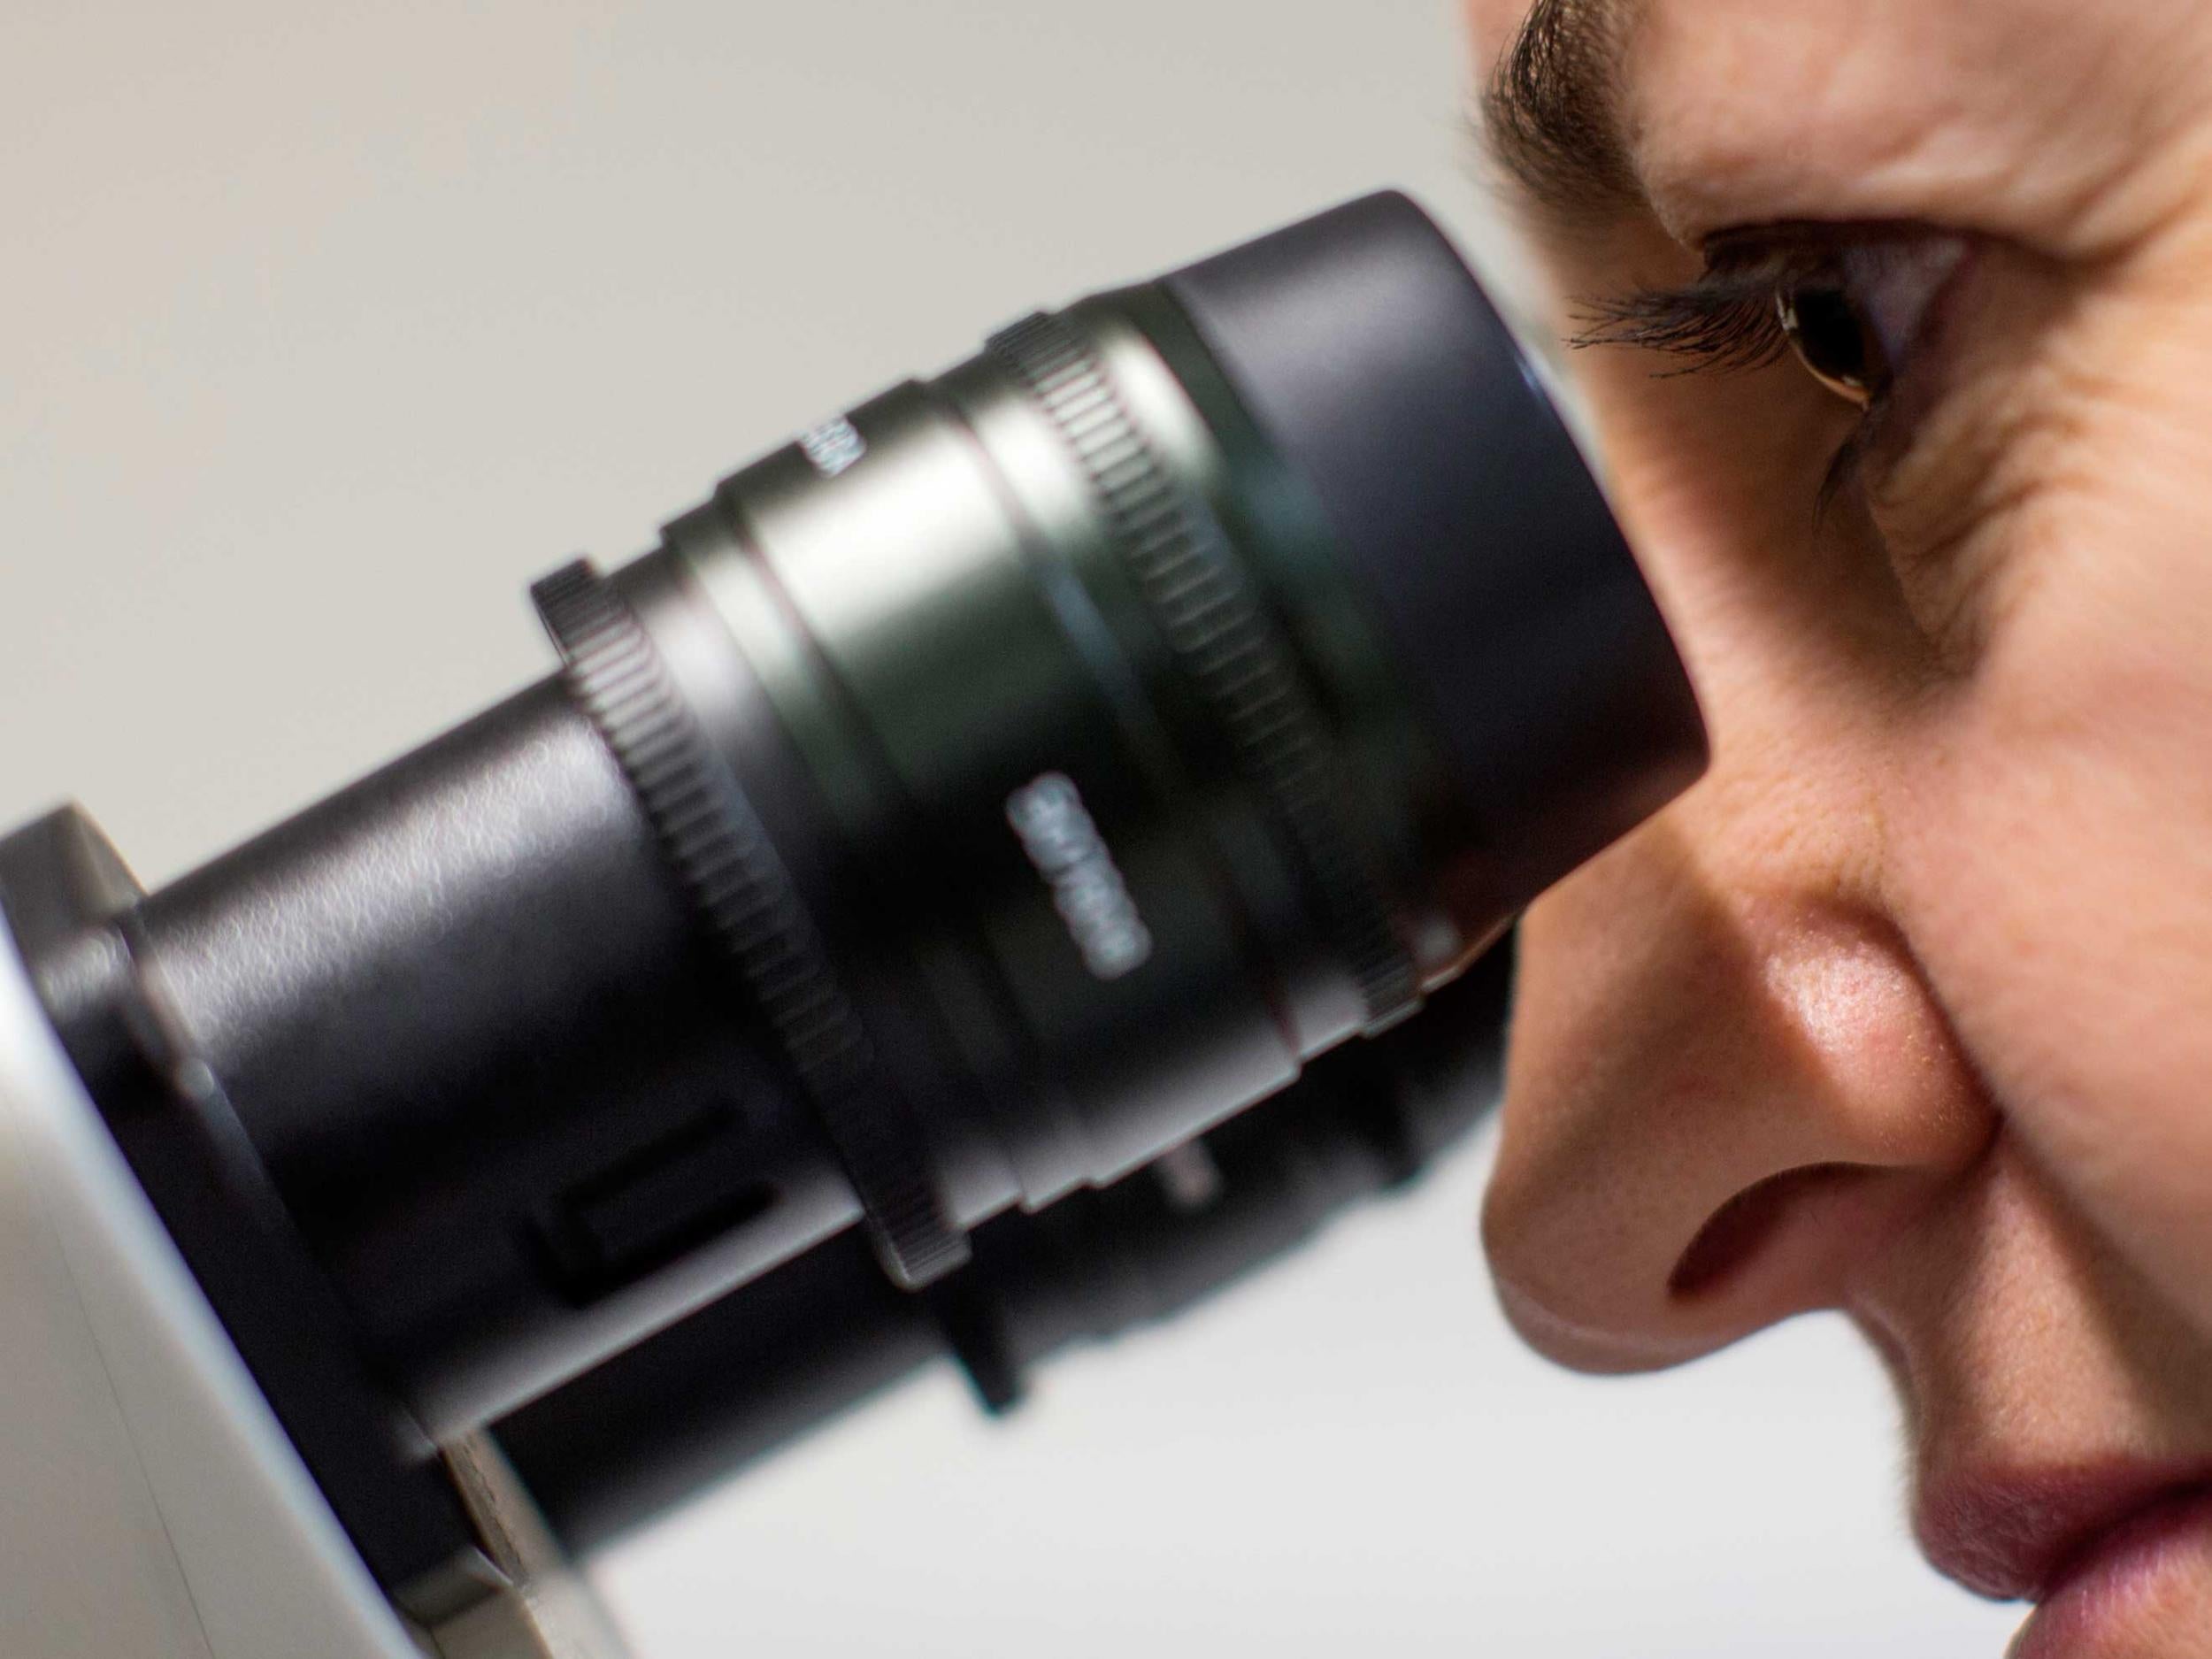 A scientist uses a microscope to examine cells